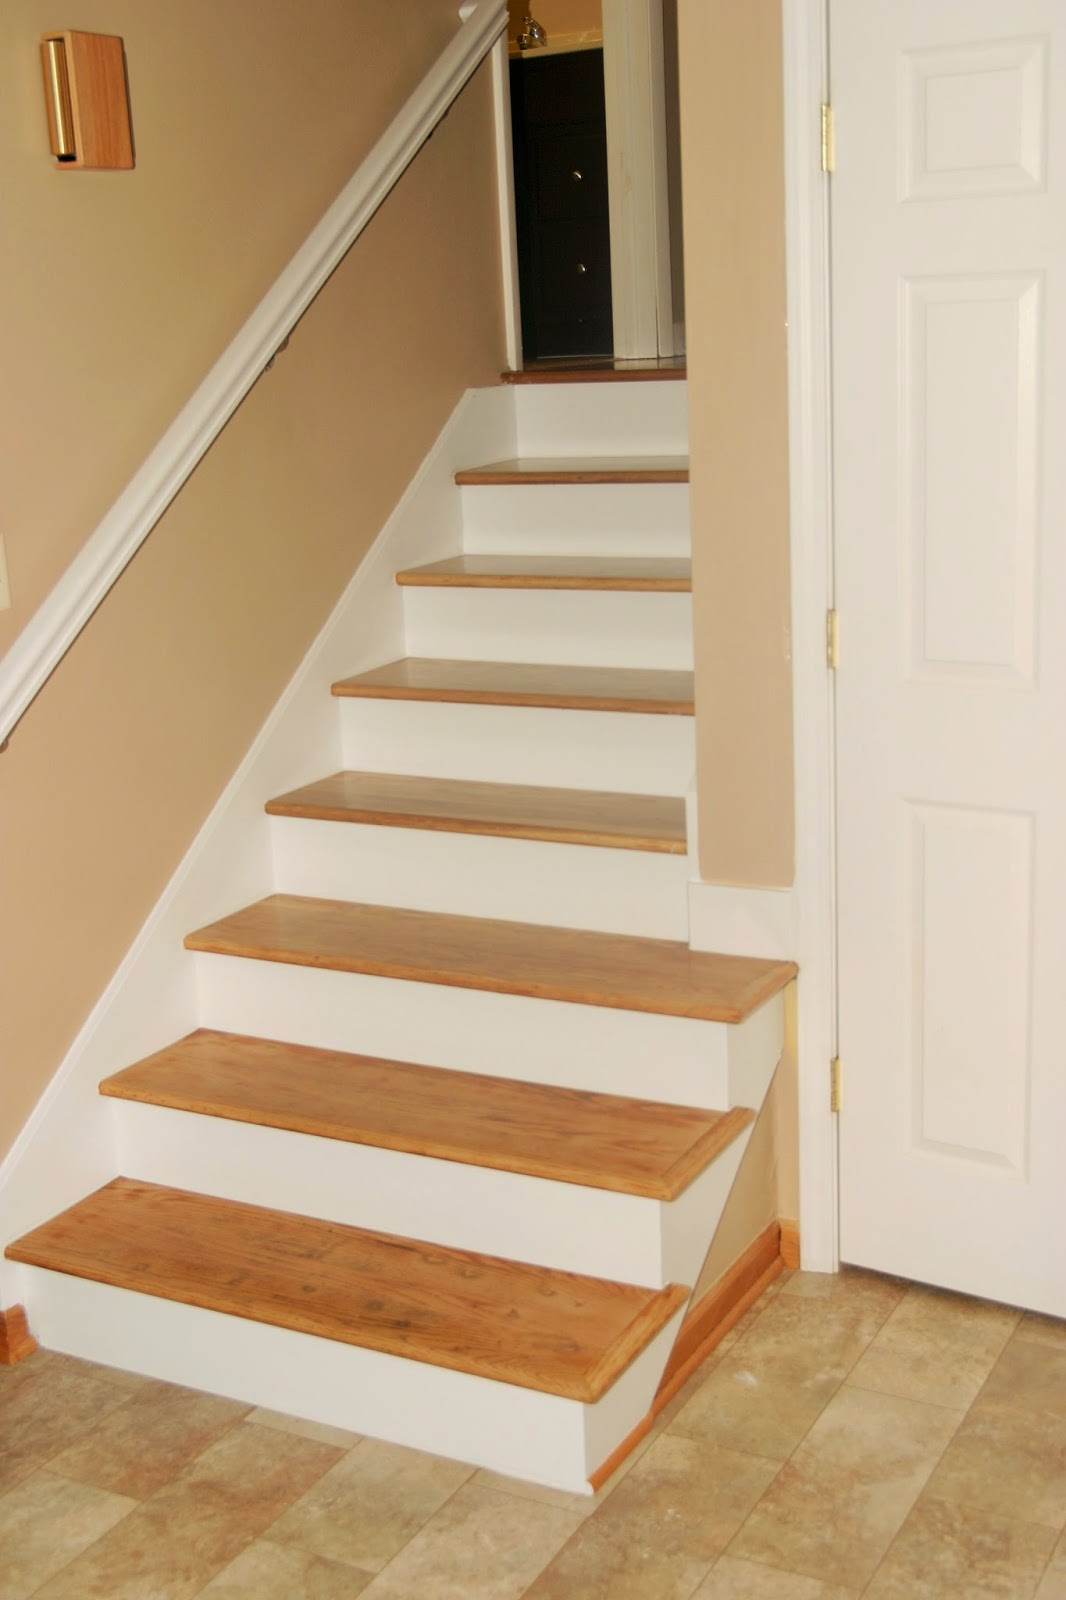 Buckeye DIY Projects Staircase Remodel